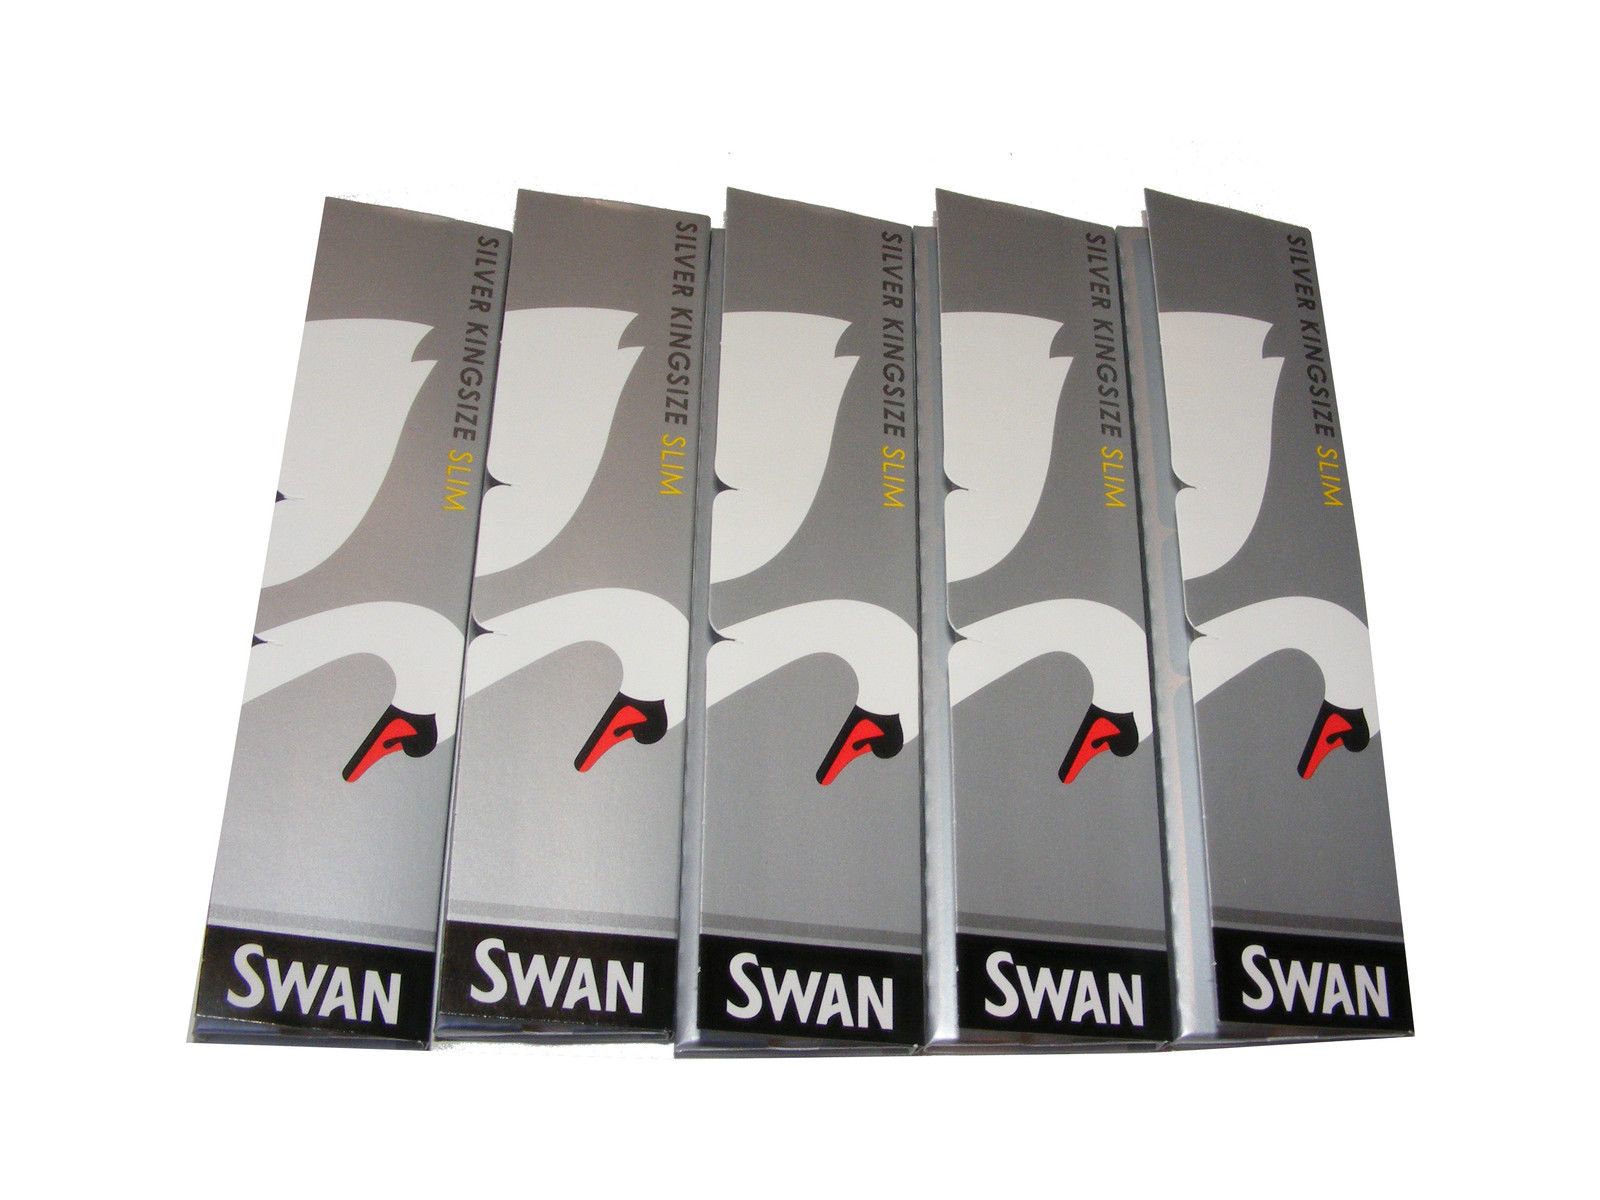 10 x PACKS SWAN SILVER KINGSIZE SLIM ROLLING PAPERS ULTRA THIN FINE WEIGHT SKINS